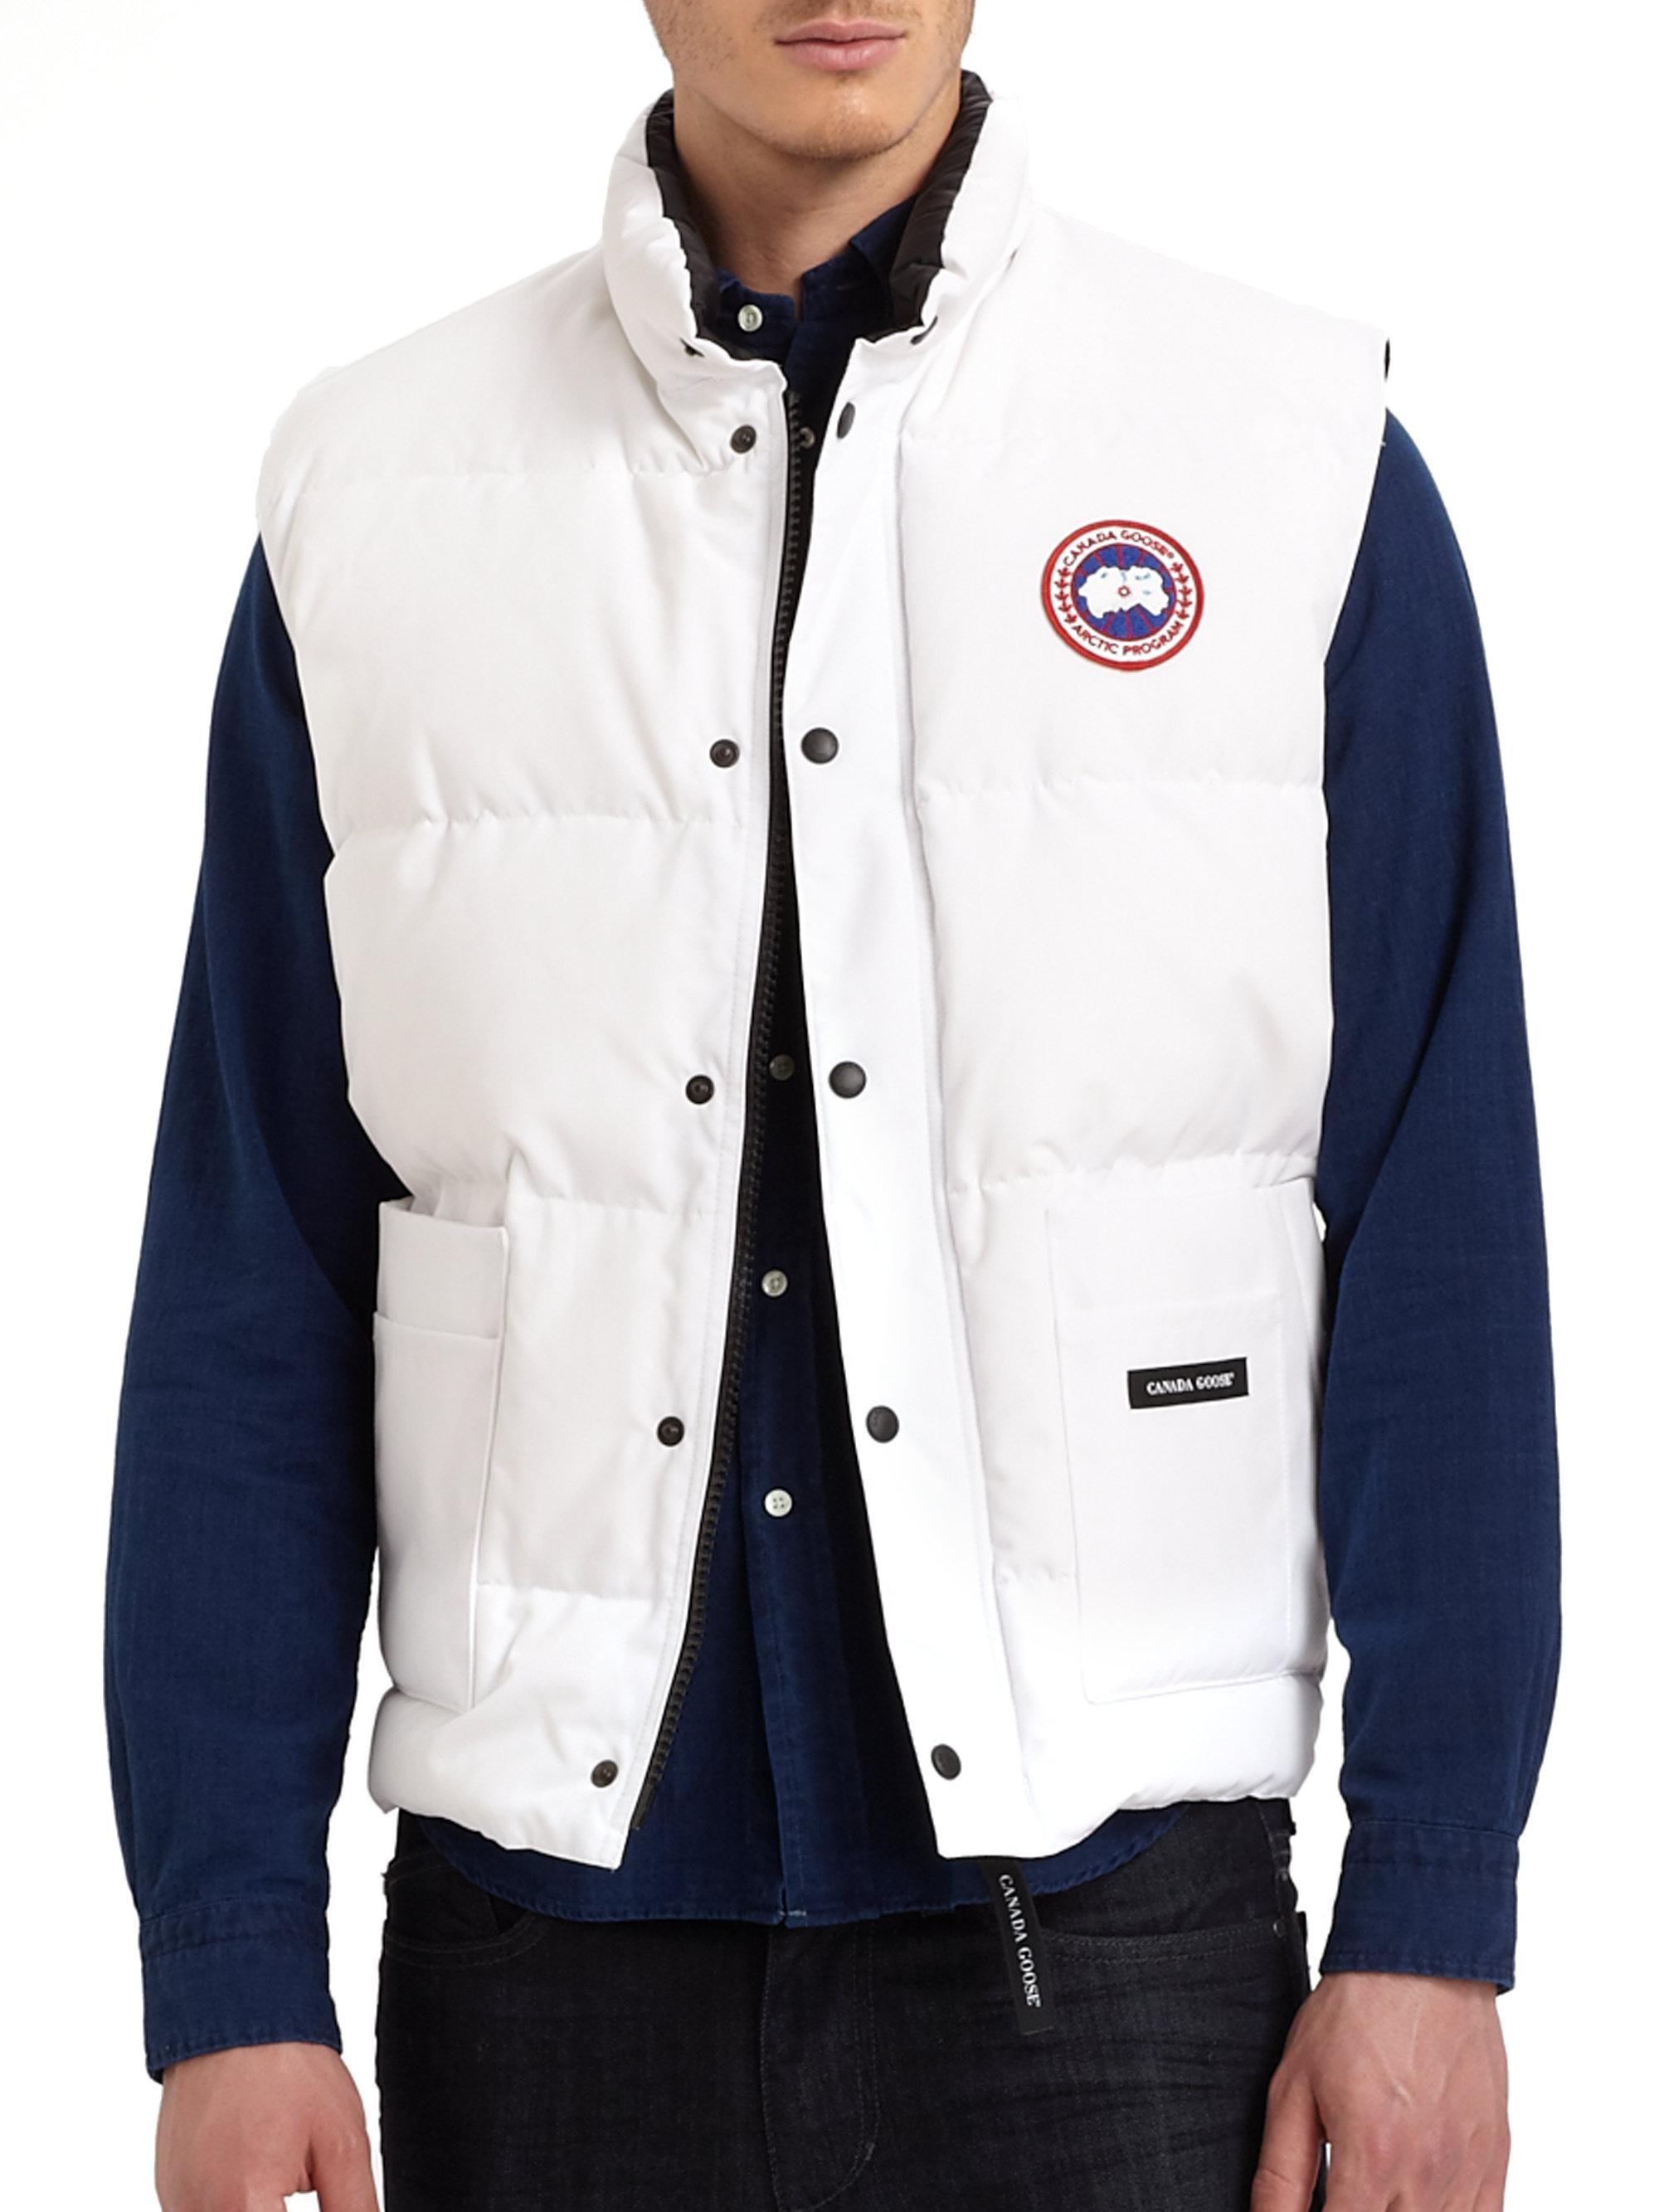 Canada Goose Goose Freestyle Puffer Vest in White for Men - Lyst